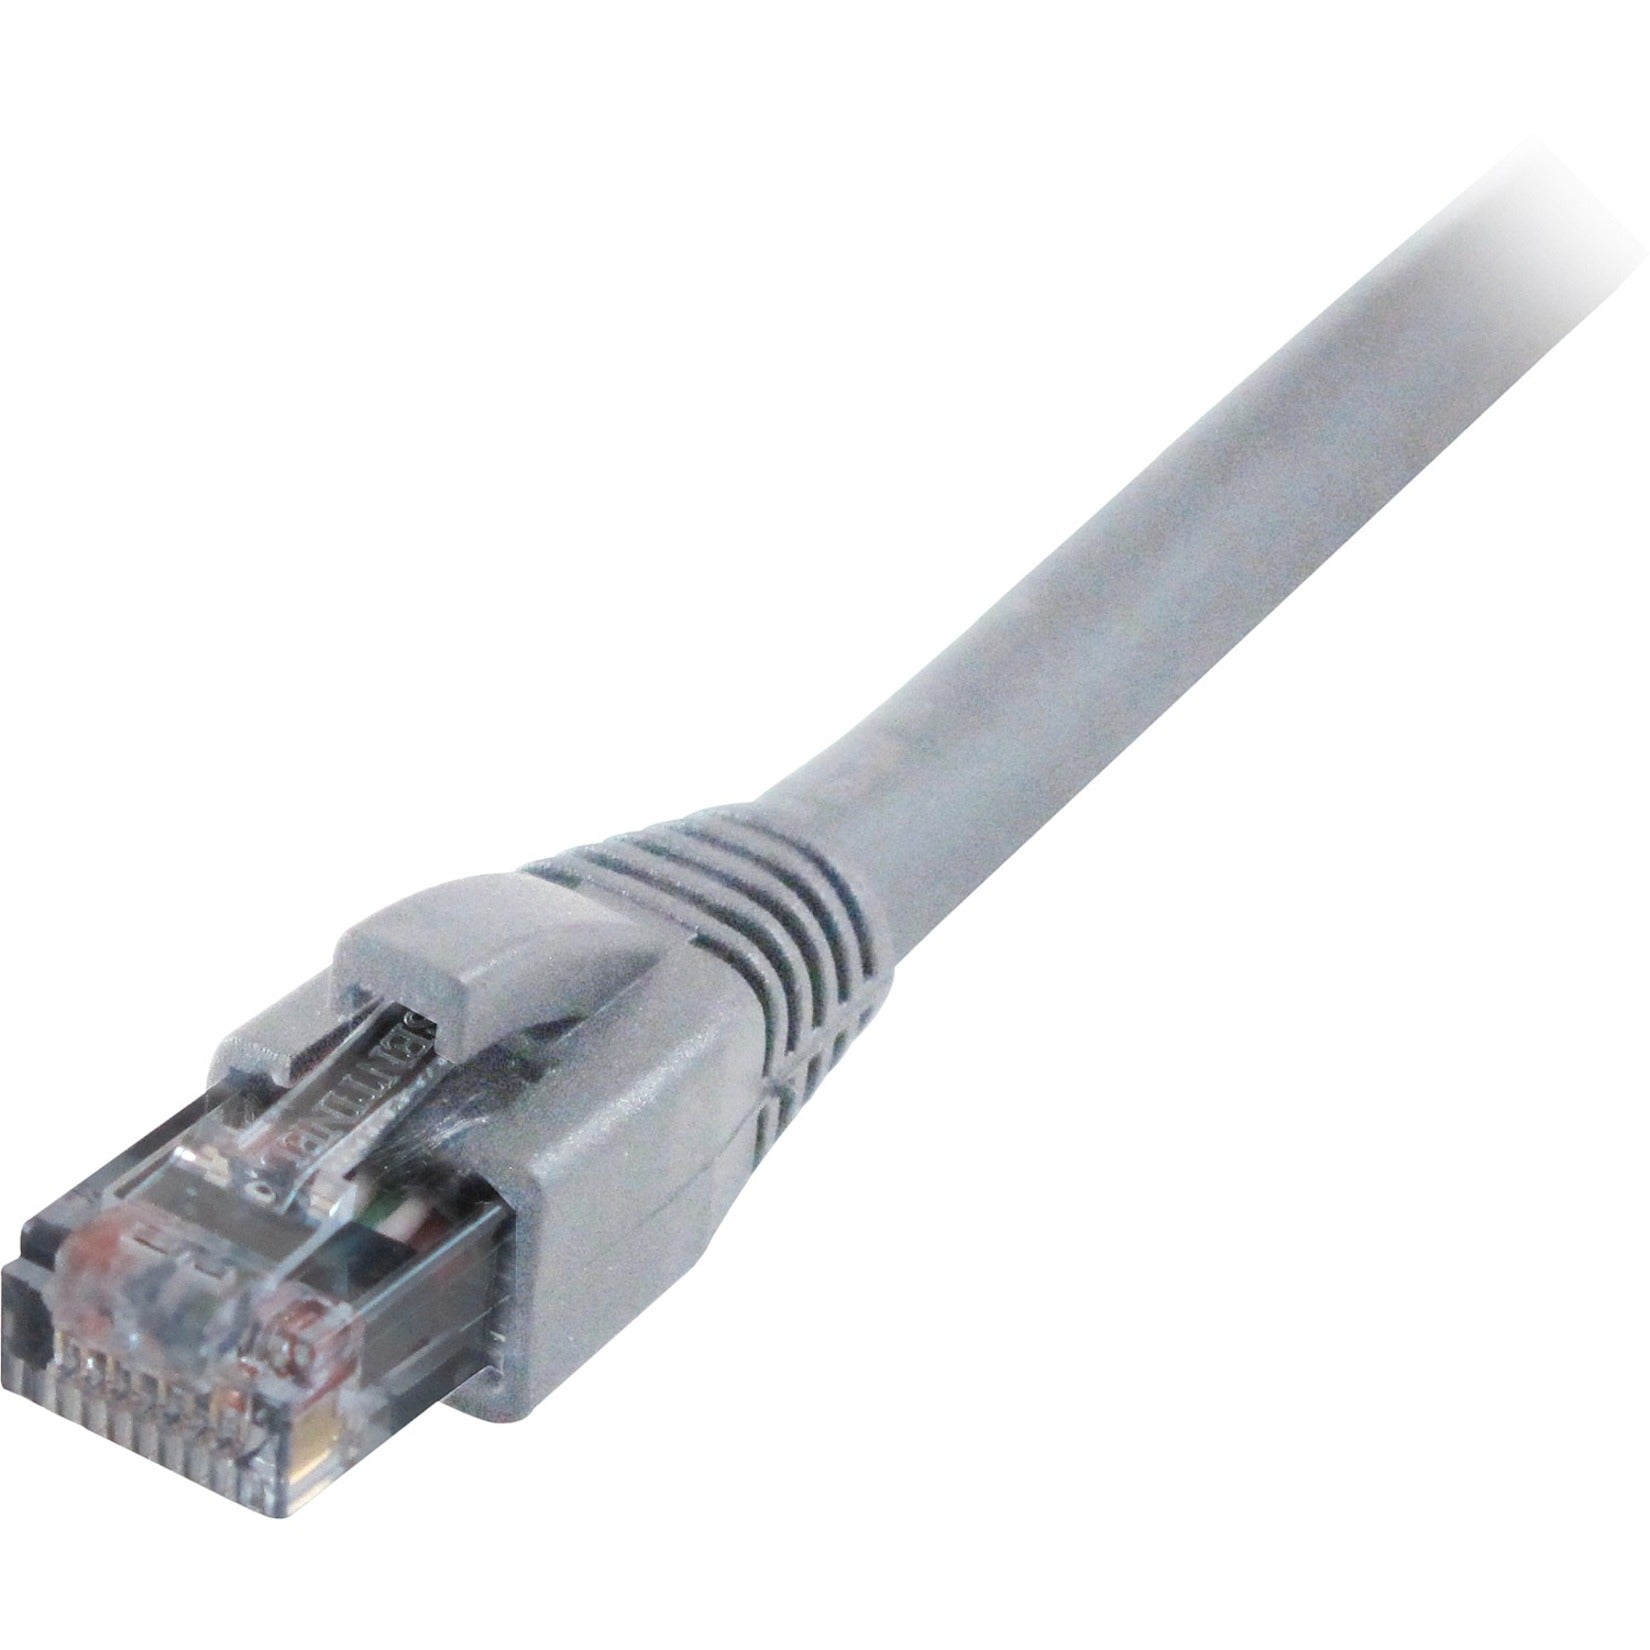 Comprehensive CAT5-350-14GRY Cat5e 350 Mhz Snagless Patch Cable 14ft Gray, Molded, Strain Relief, Stranded, Booted, 1 Gbit/s Data Transfer Rate